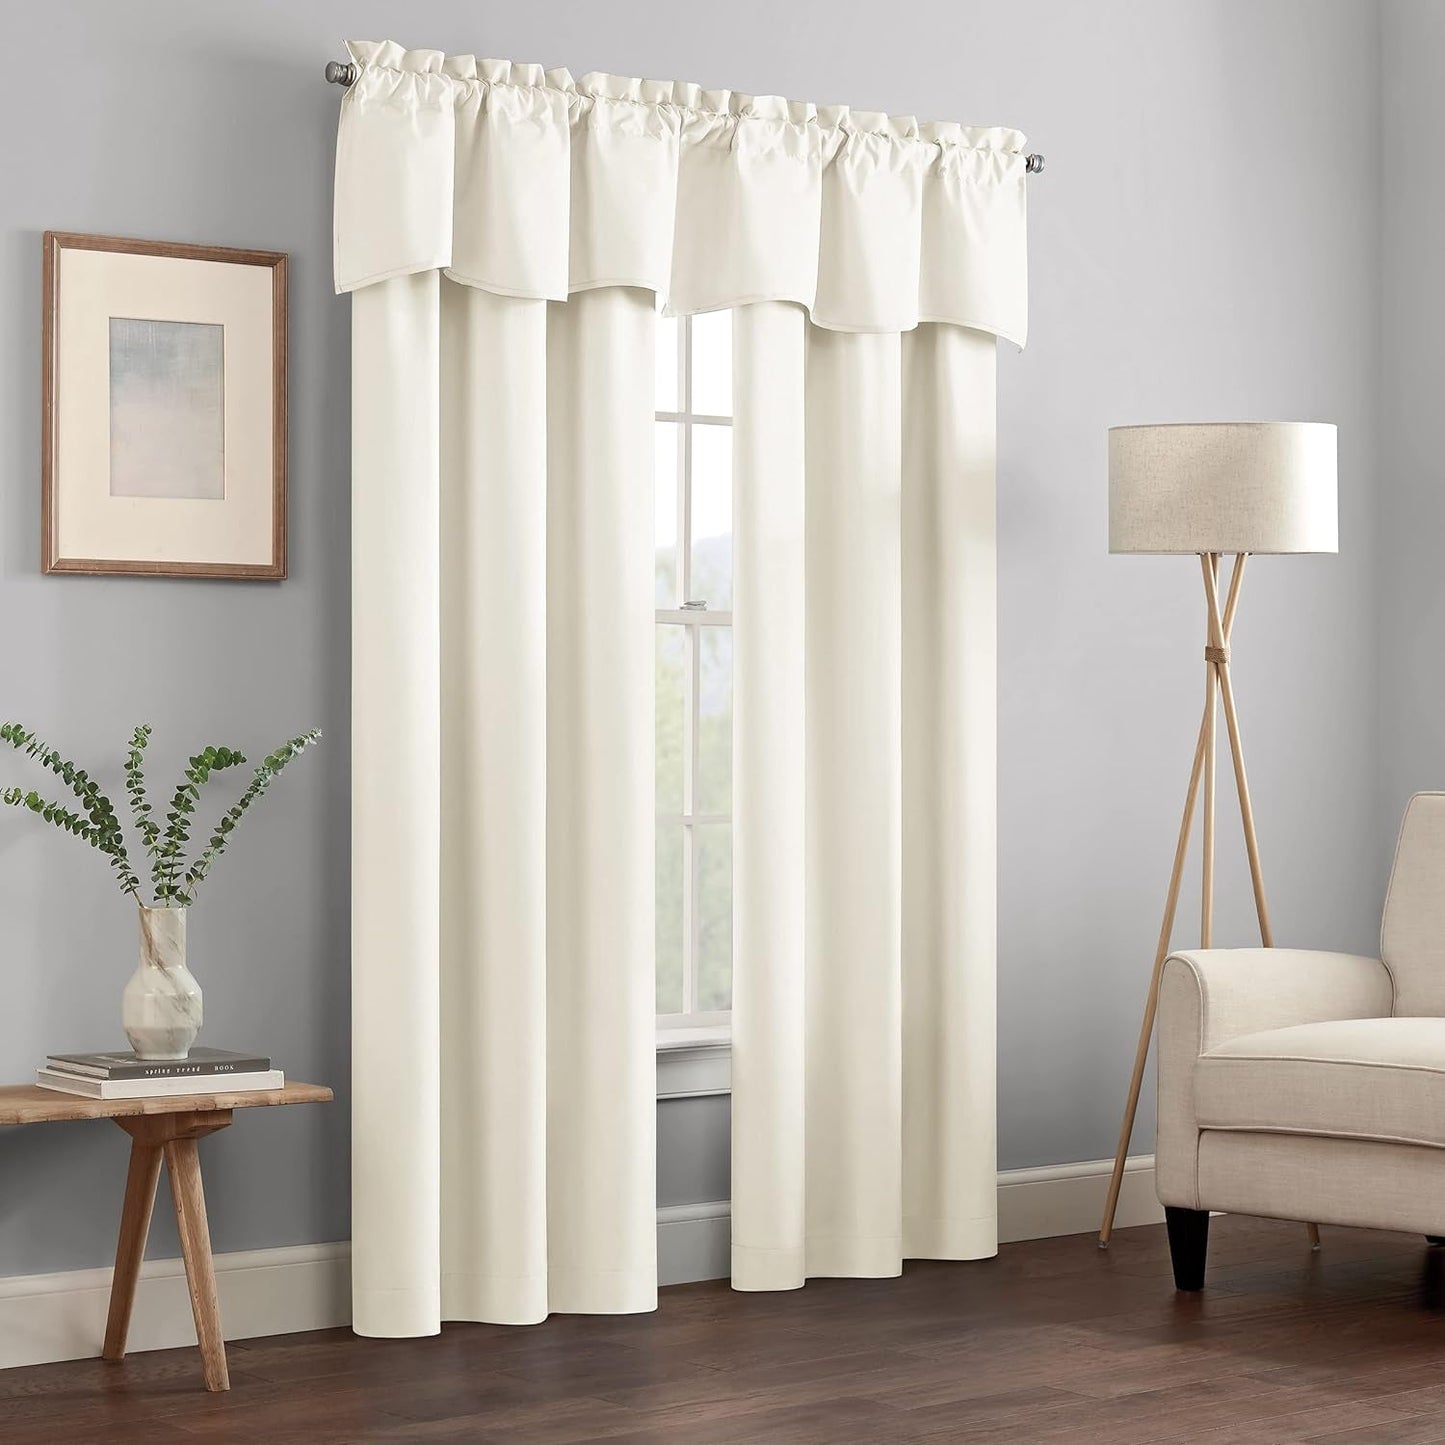 Eclipse Kendall Modern Scalloped Valance Rod Pocket Window Curtain for Kitchen or Bathroom, 42 in X 18 In, Ivory